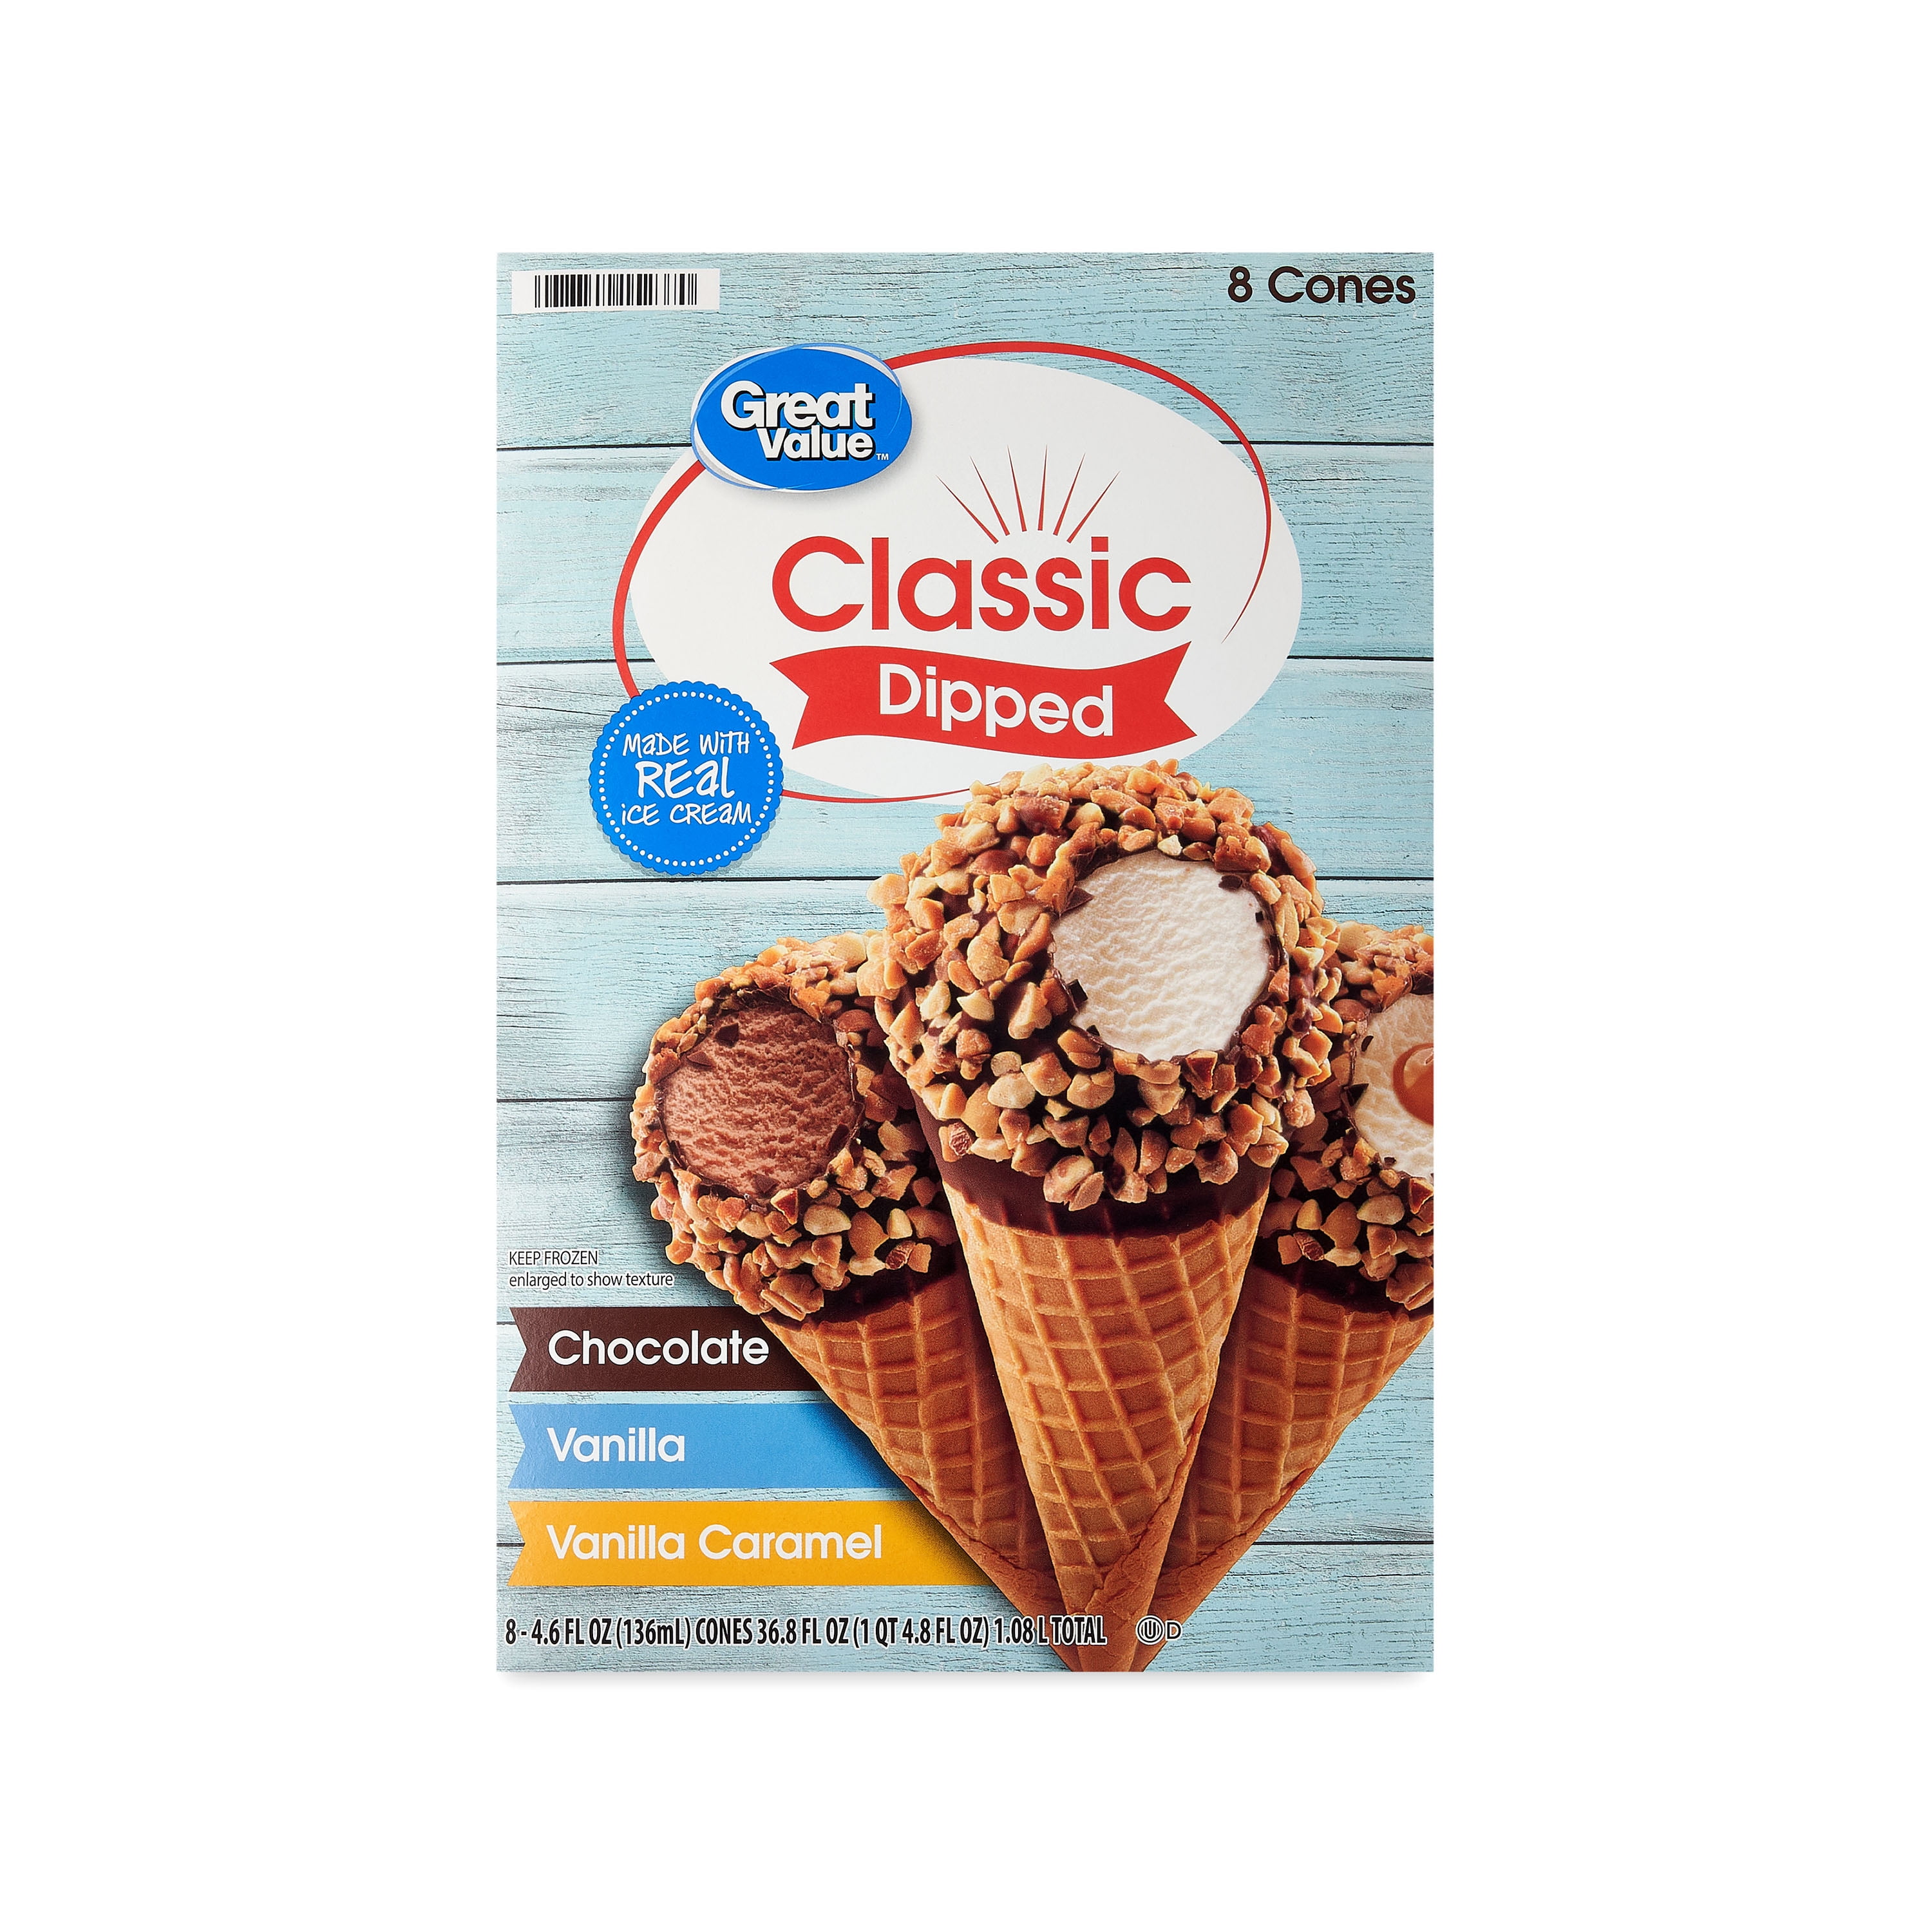 Great Value Classic Dipped Ice Cream Cones Variety Pack, 4.6 fl oz, 8 Count